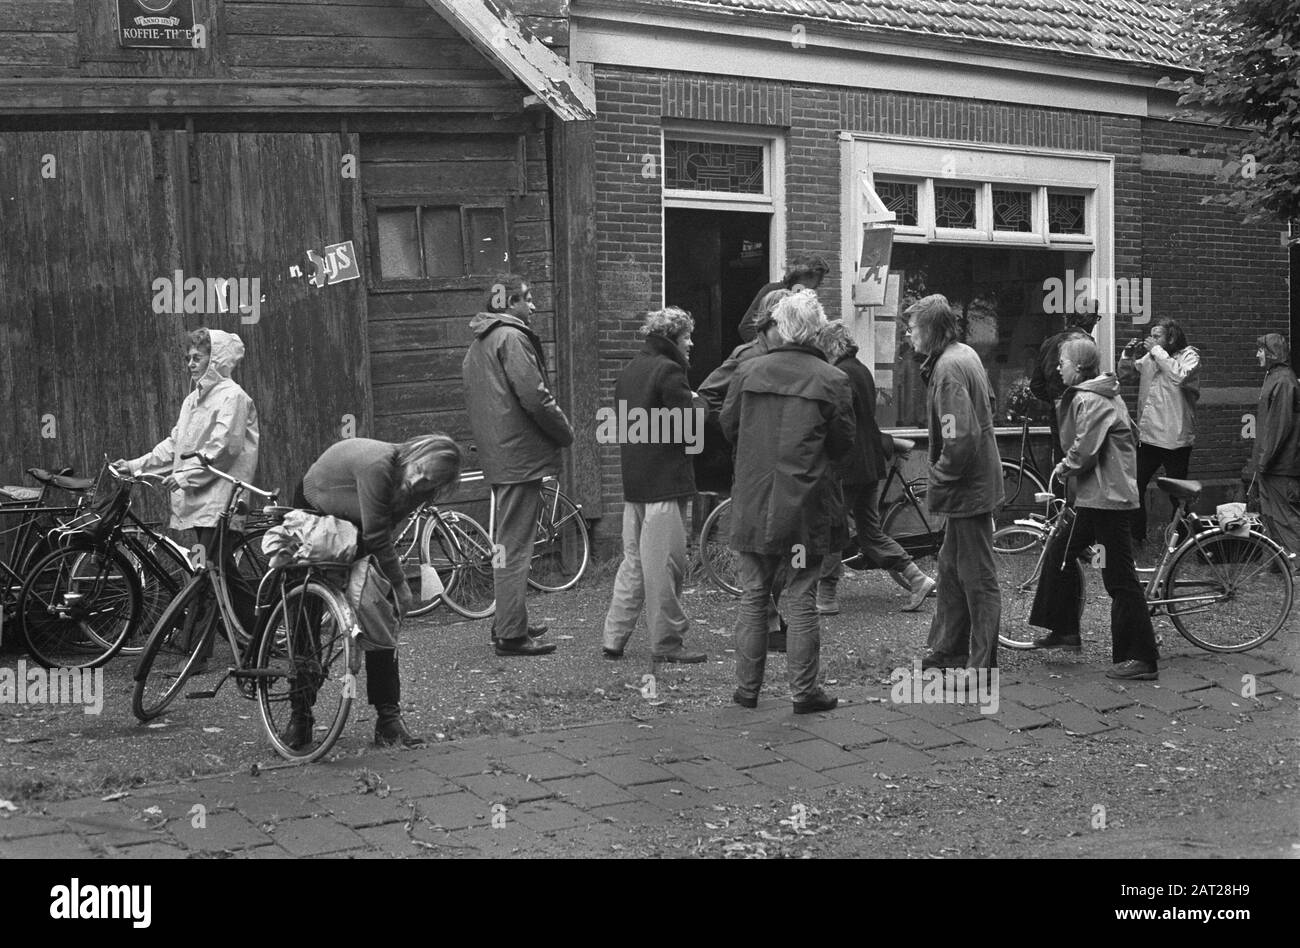 Bike tour for conservation of Ruigoord, the cyclists Date: August 5, 1973 Location: Amsterdam, Noord-Holland, Ruigoord Keywords: cyclists Stock Photo